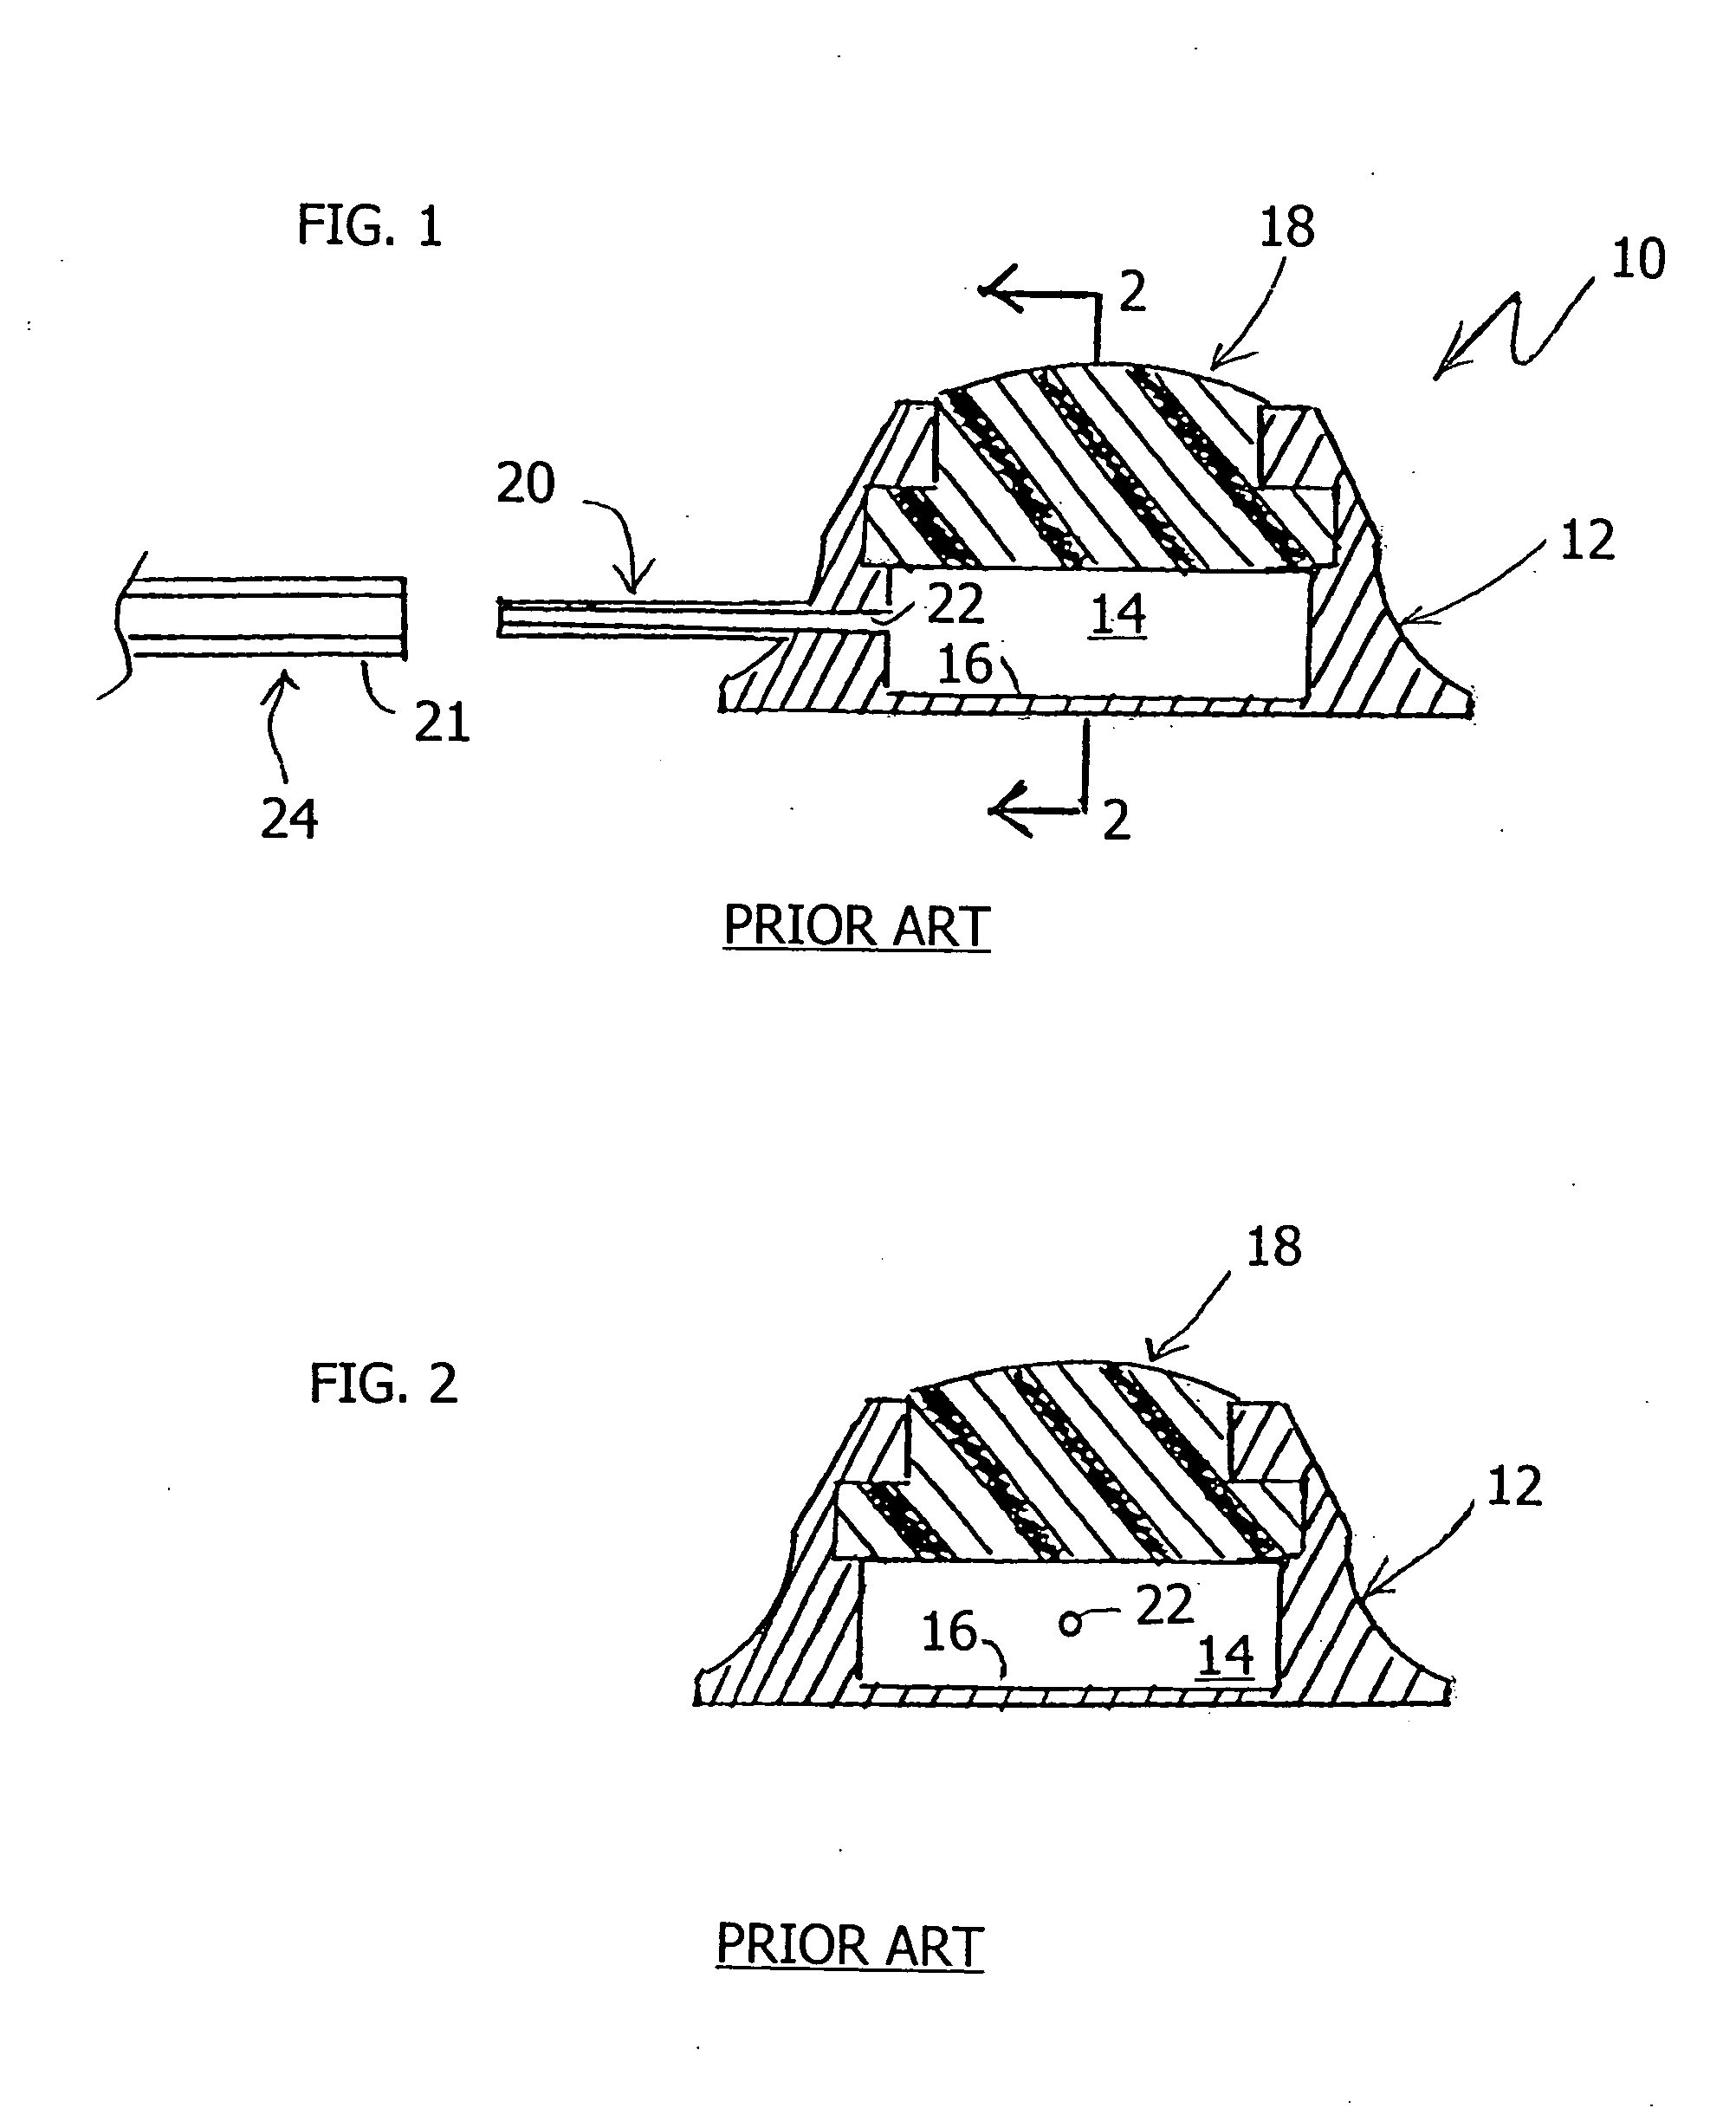 Subcutaneous vascular access port, and method of using same